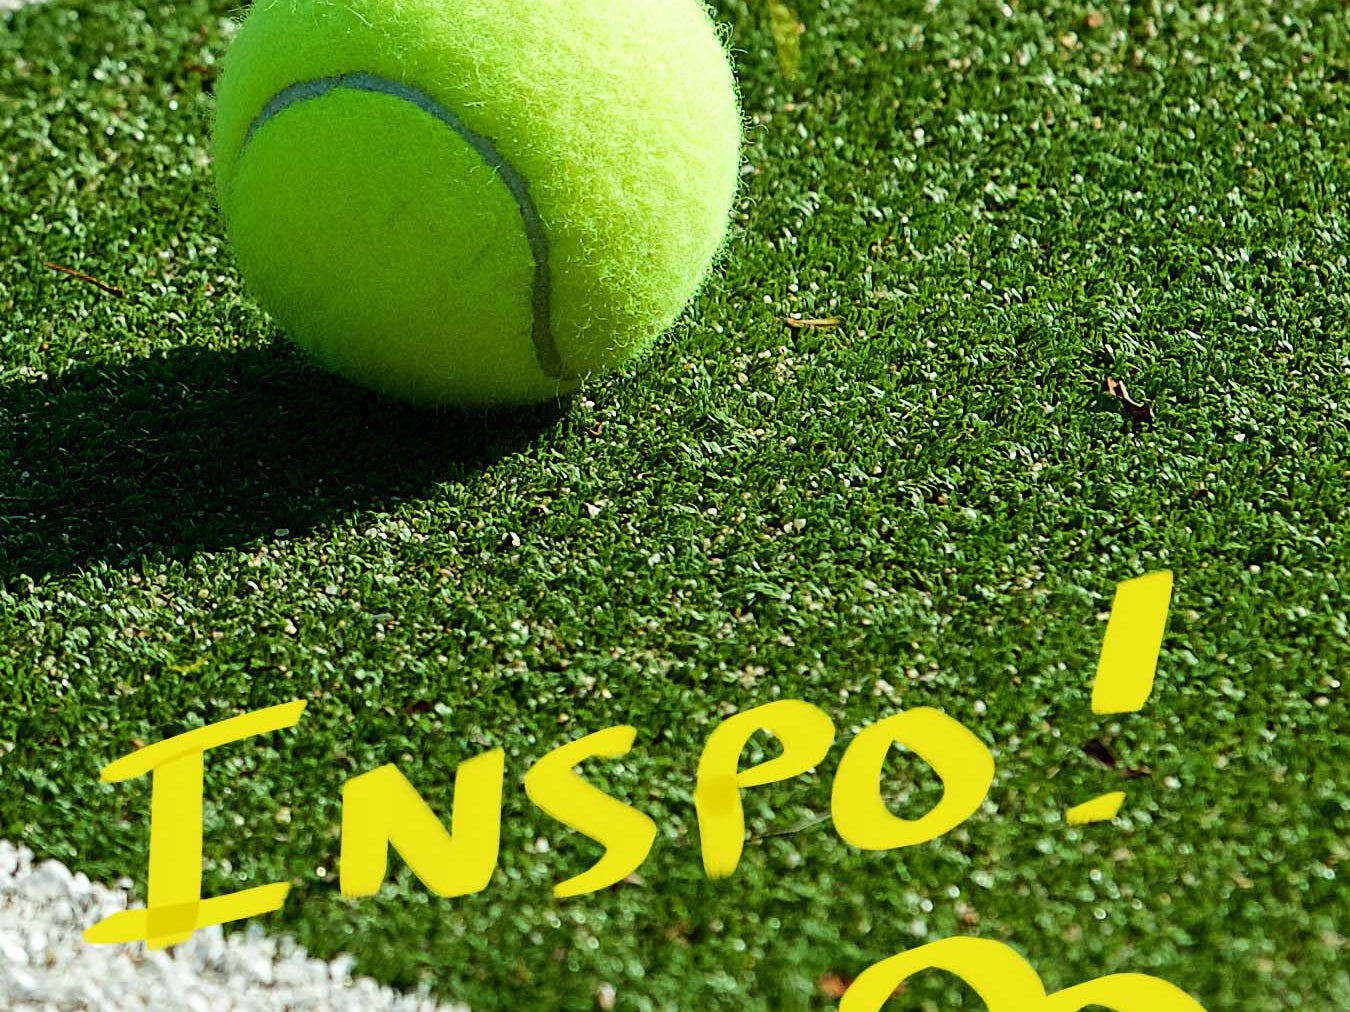 tennis ball on green grass with Inspo illustrated